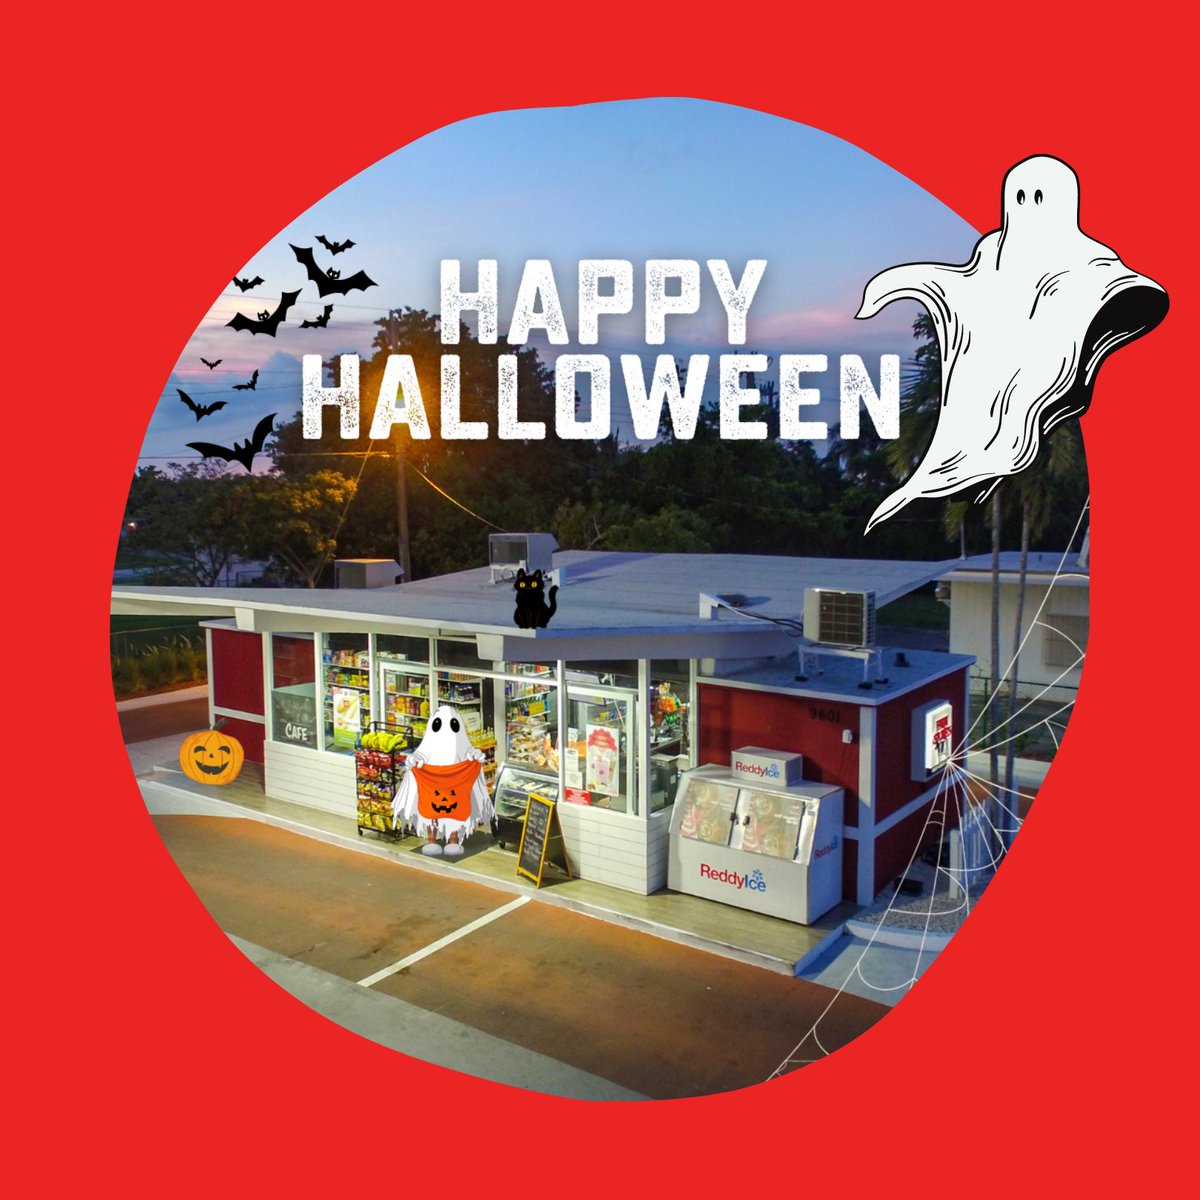 Boo! Happy Halloween, Farm Stores Family. We hope you have a fun, safe, and spooky Halloween!